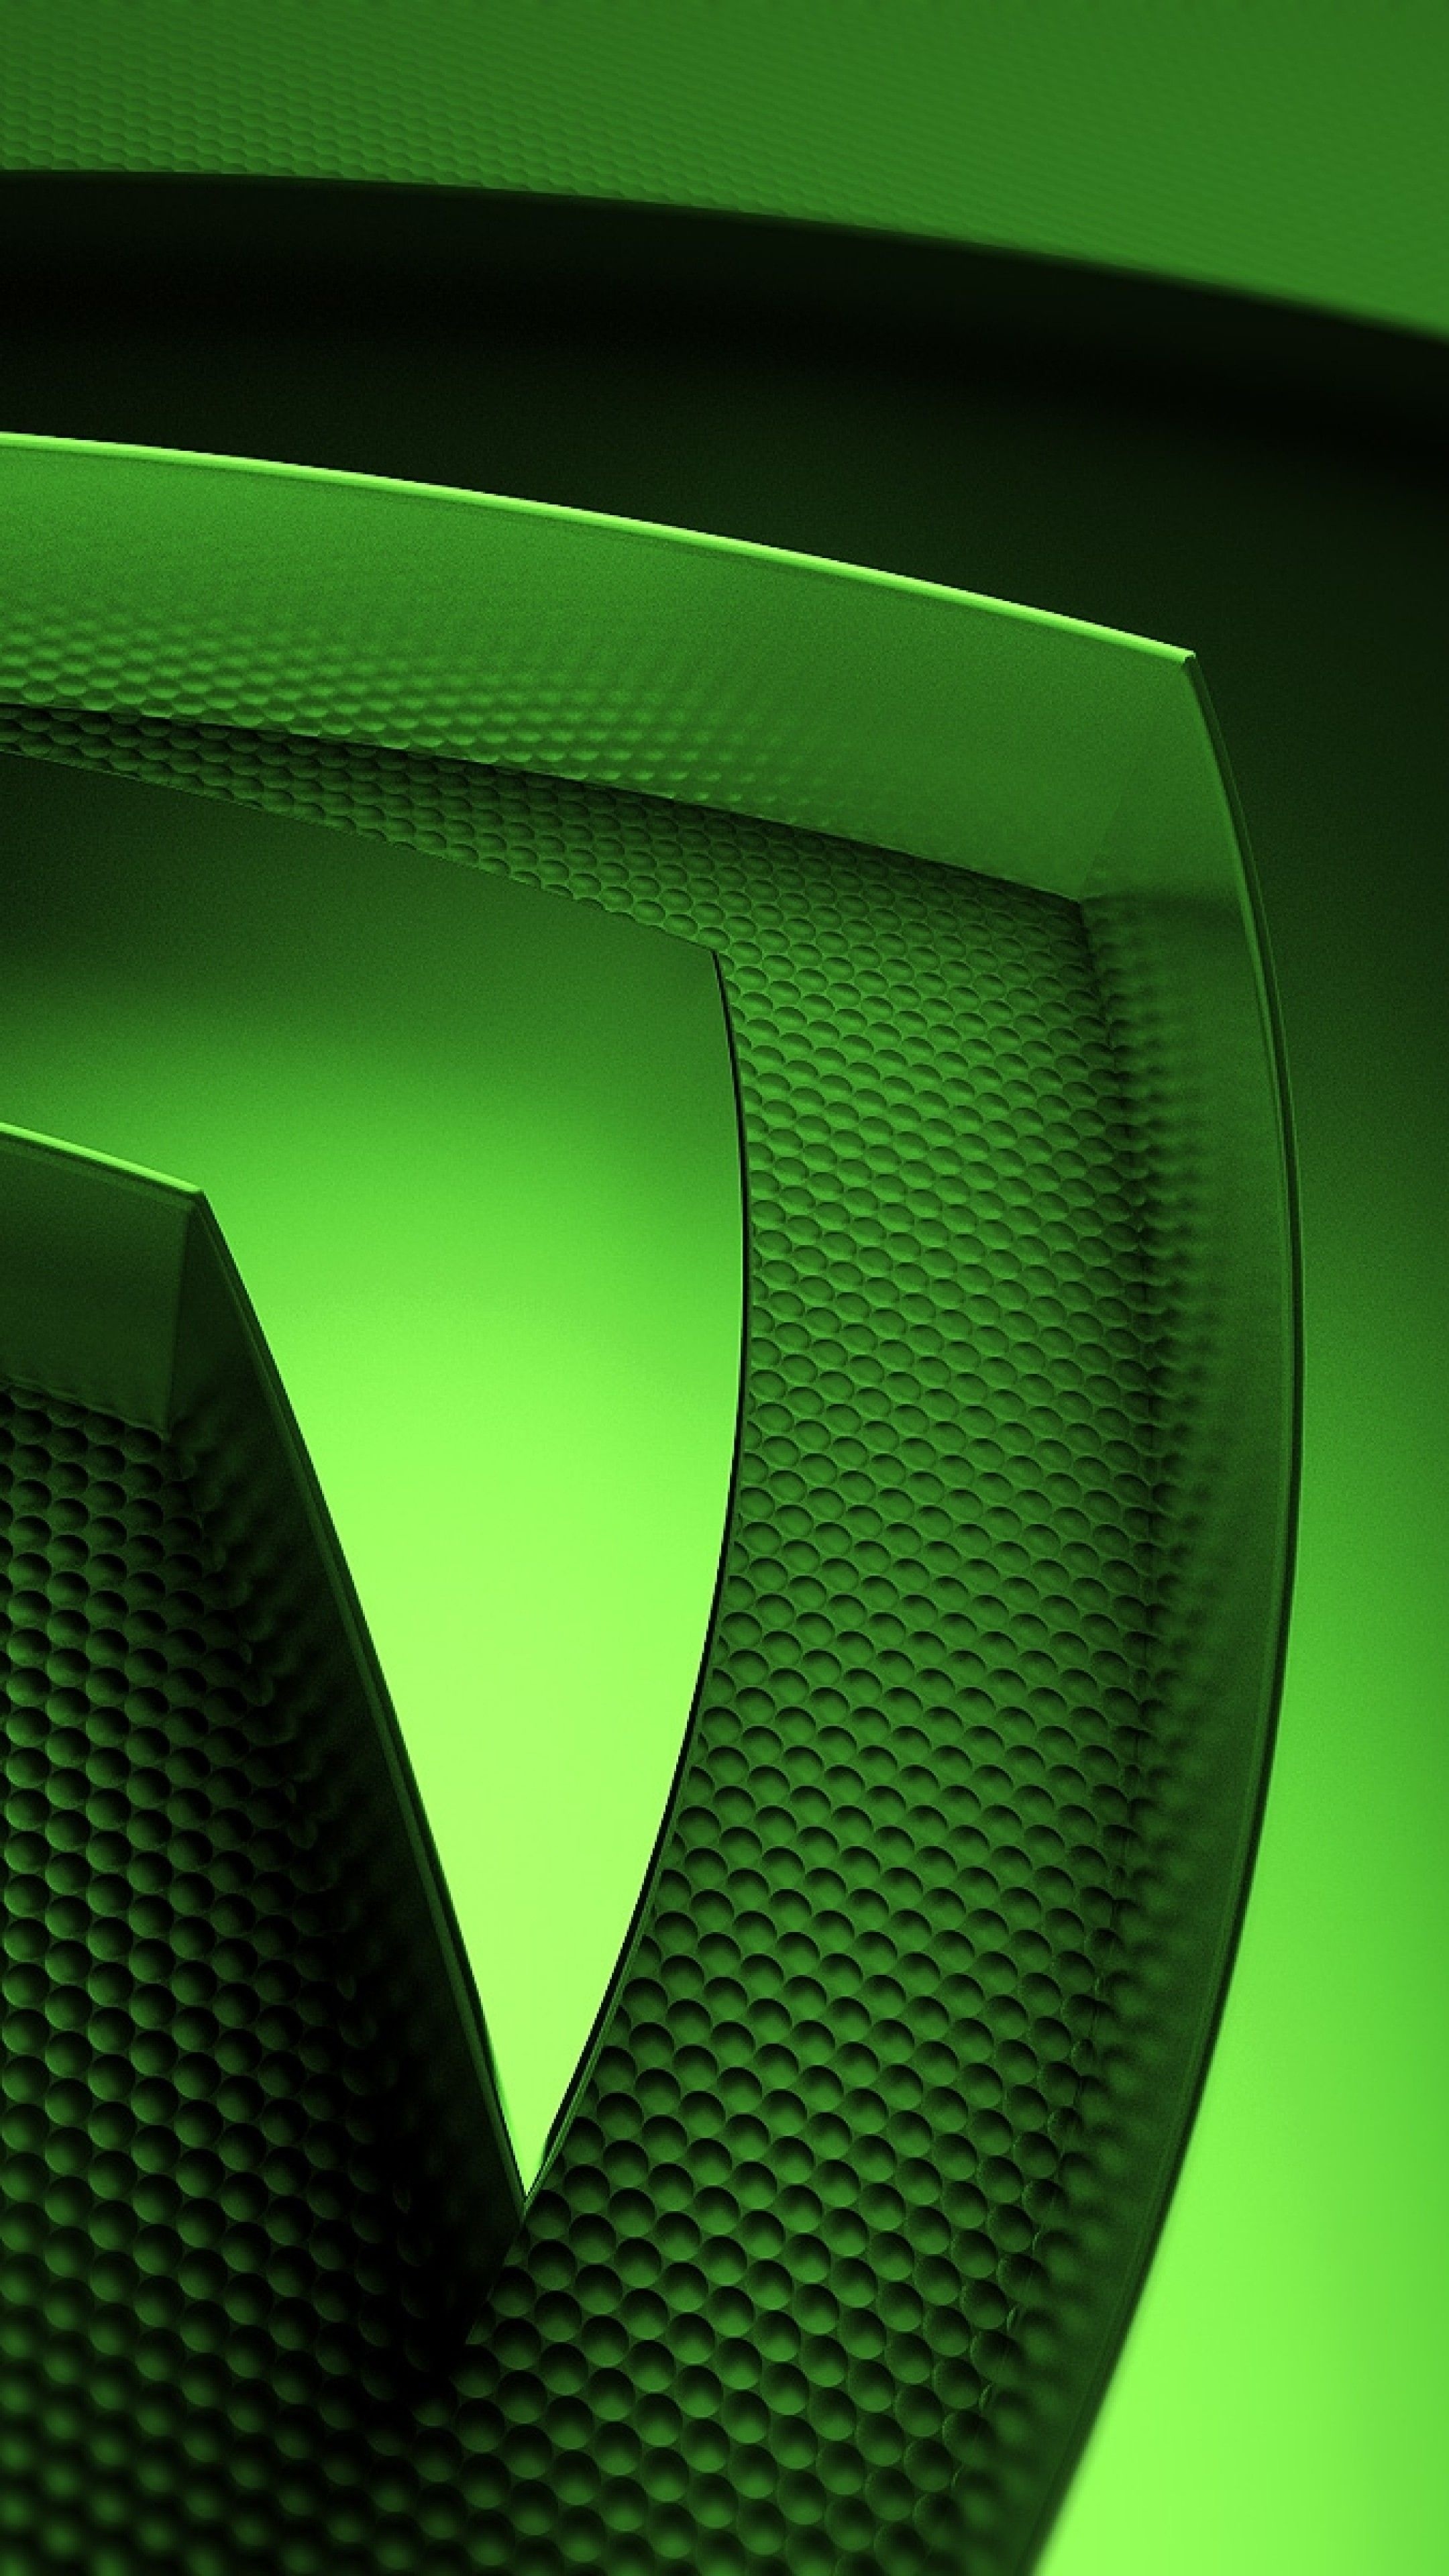 Nvidia: Symbol, Technology, The "eye", Constant search of innovation and the future. 2160x3840 4K Wallpaper.